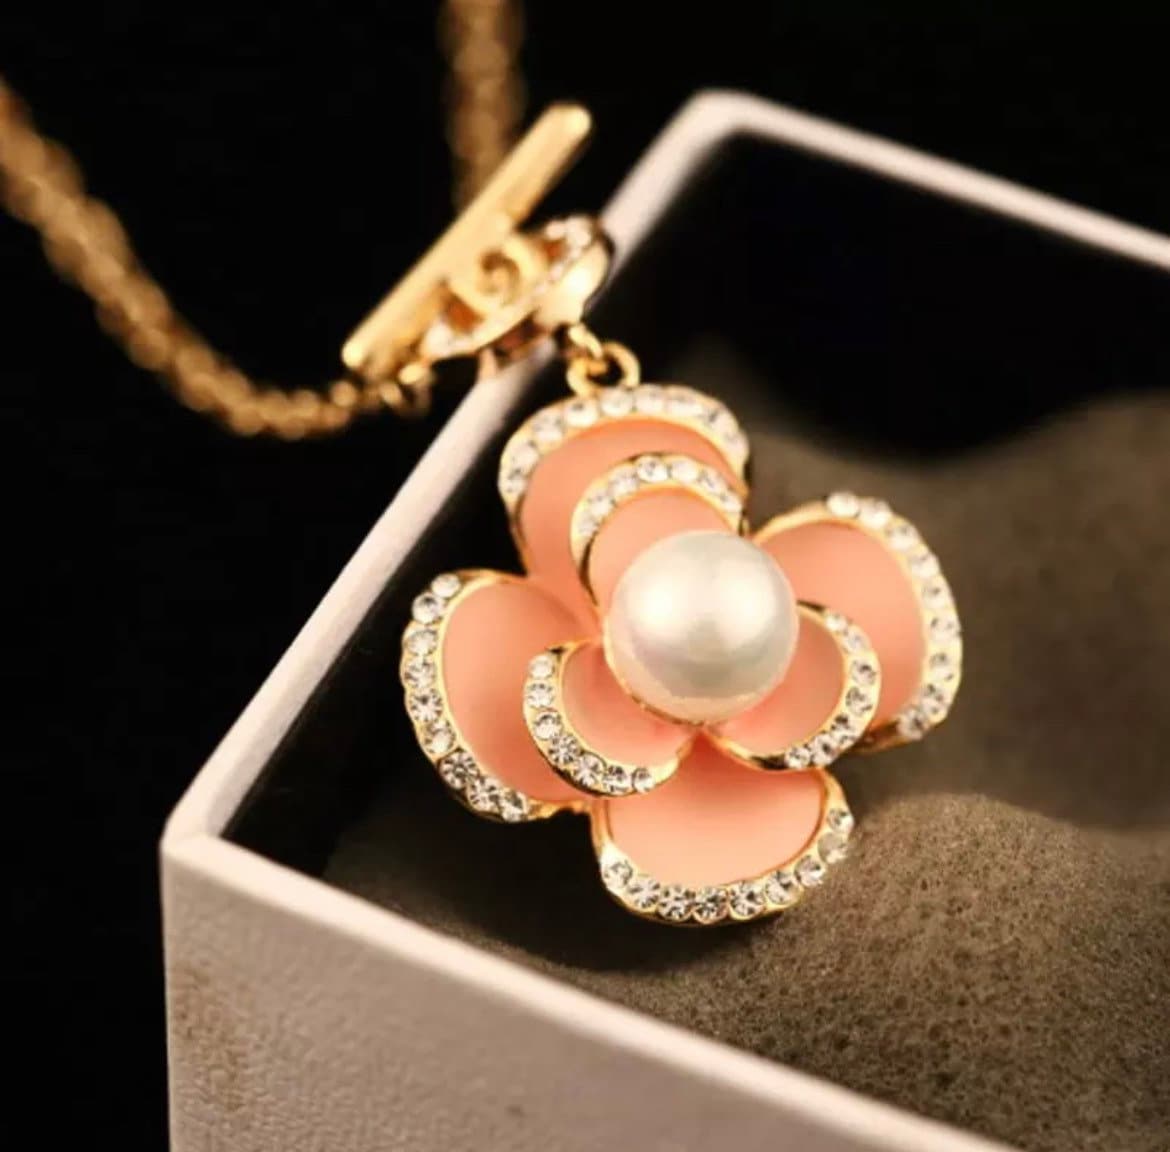 Estella Bartlett 'All Kinds of Wonderful' Dotted Pearl Flower Pendant  Necklace, Gold at John Lewis & Partners